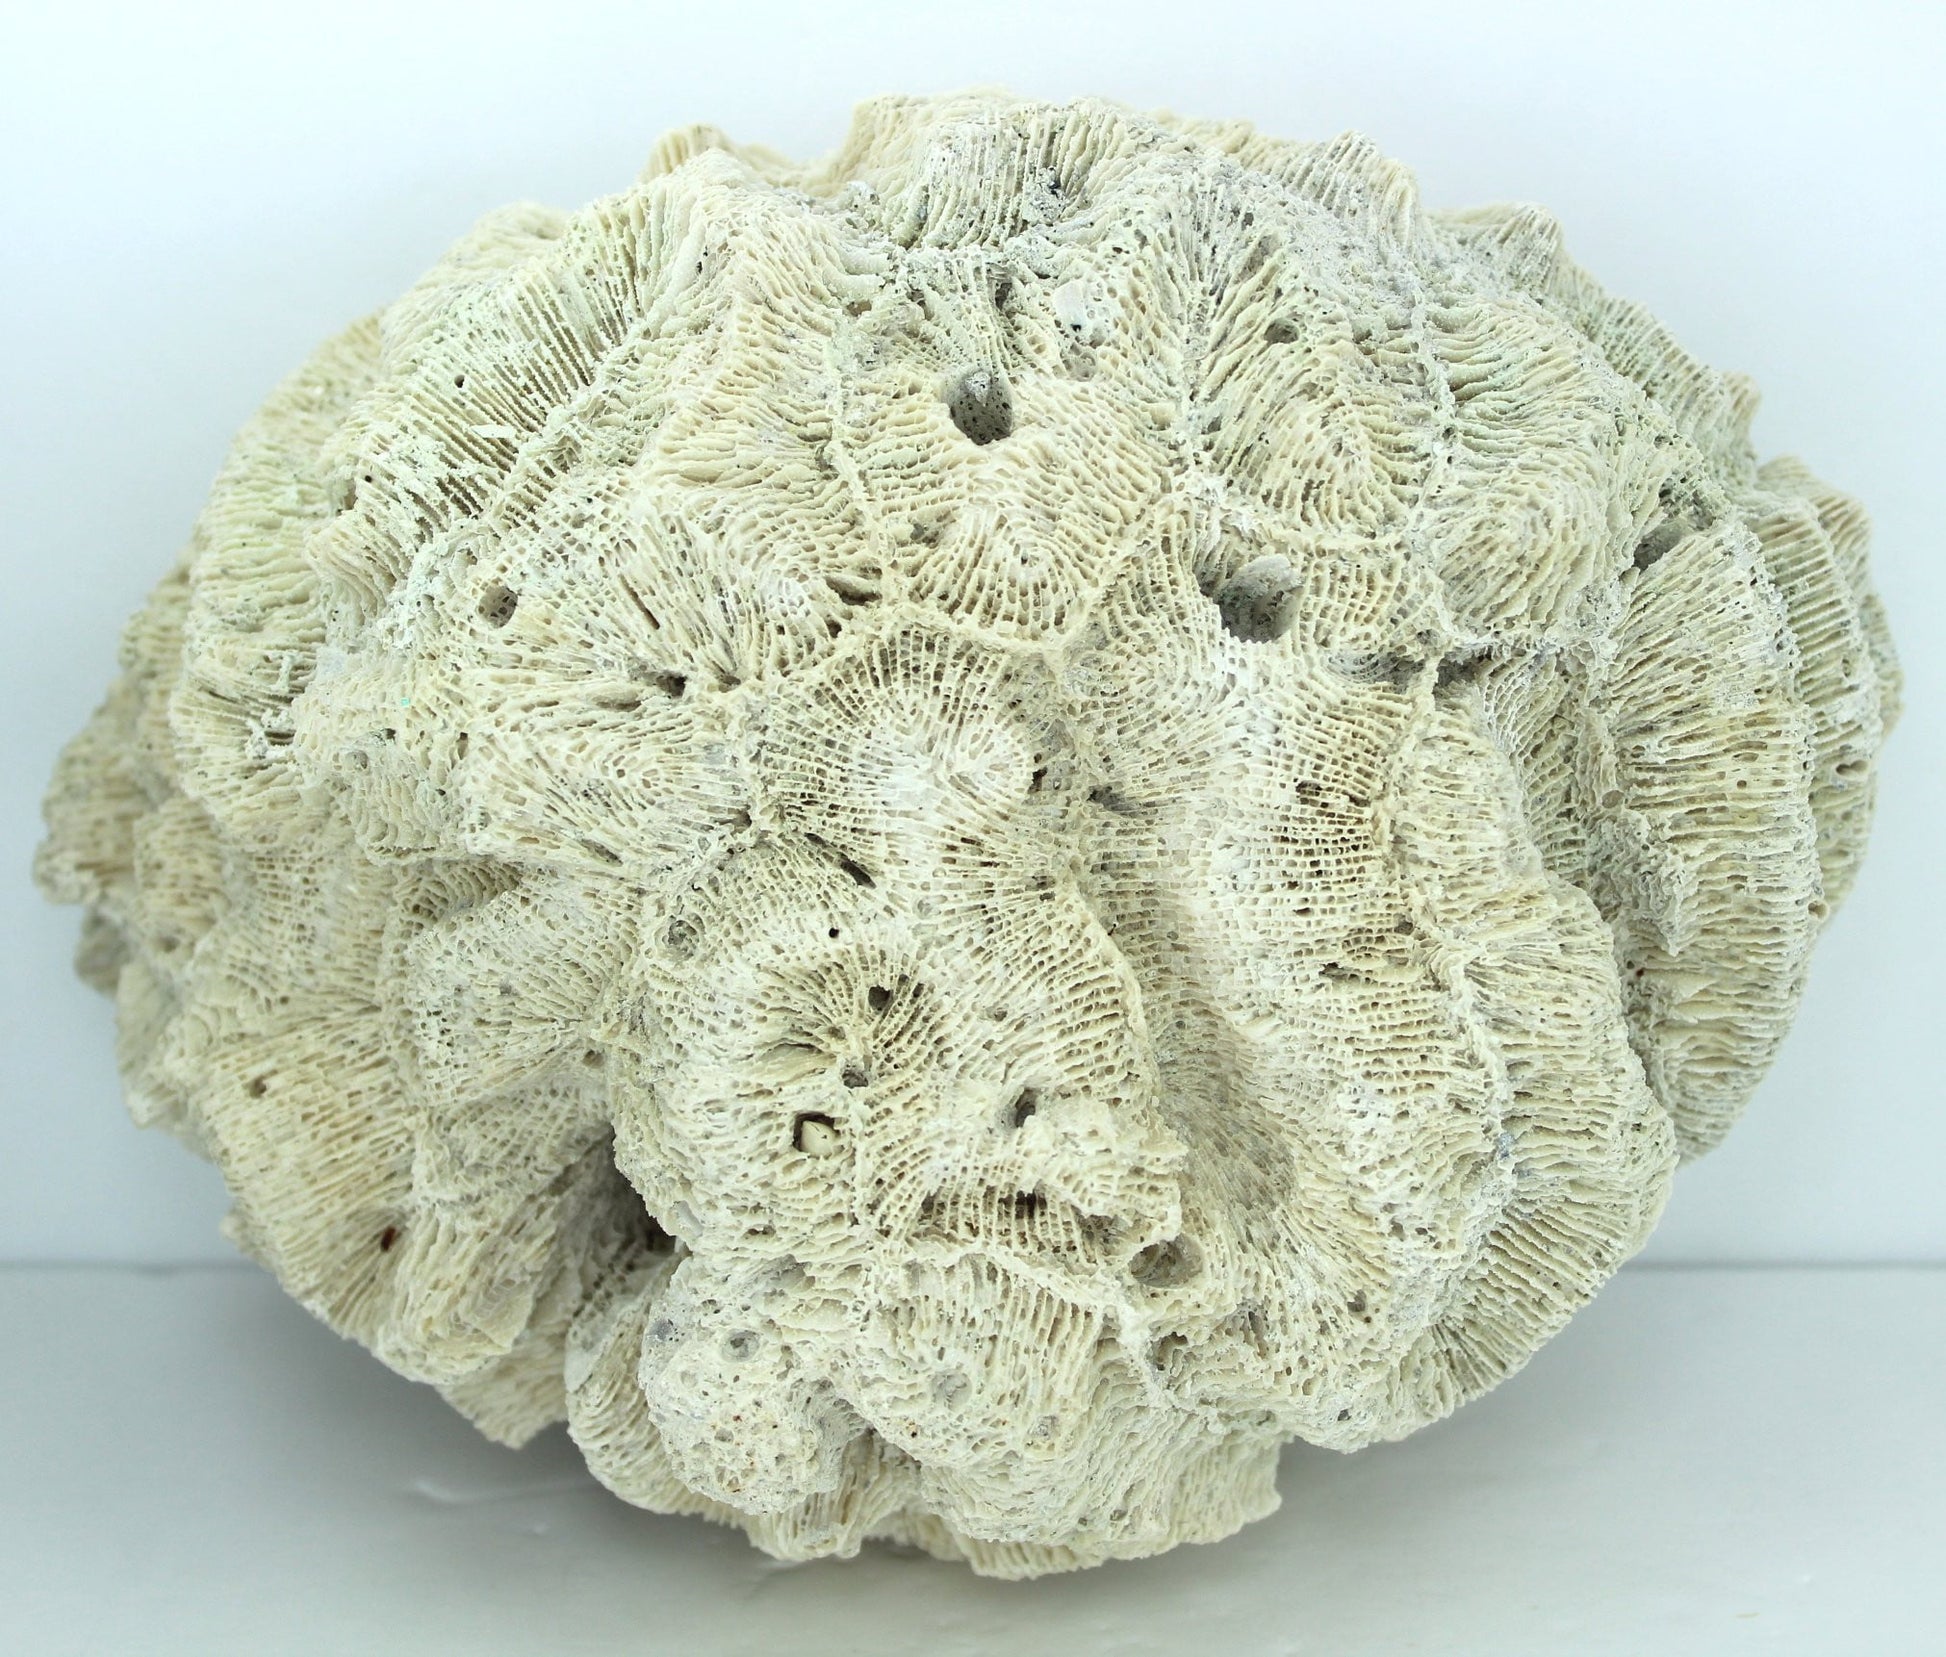 Natural Brain Coral Fossil Large 8 1/2" X 6" Heavy 3# Florida Estate Unusually Lovely Collectible patterned